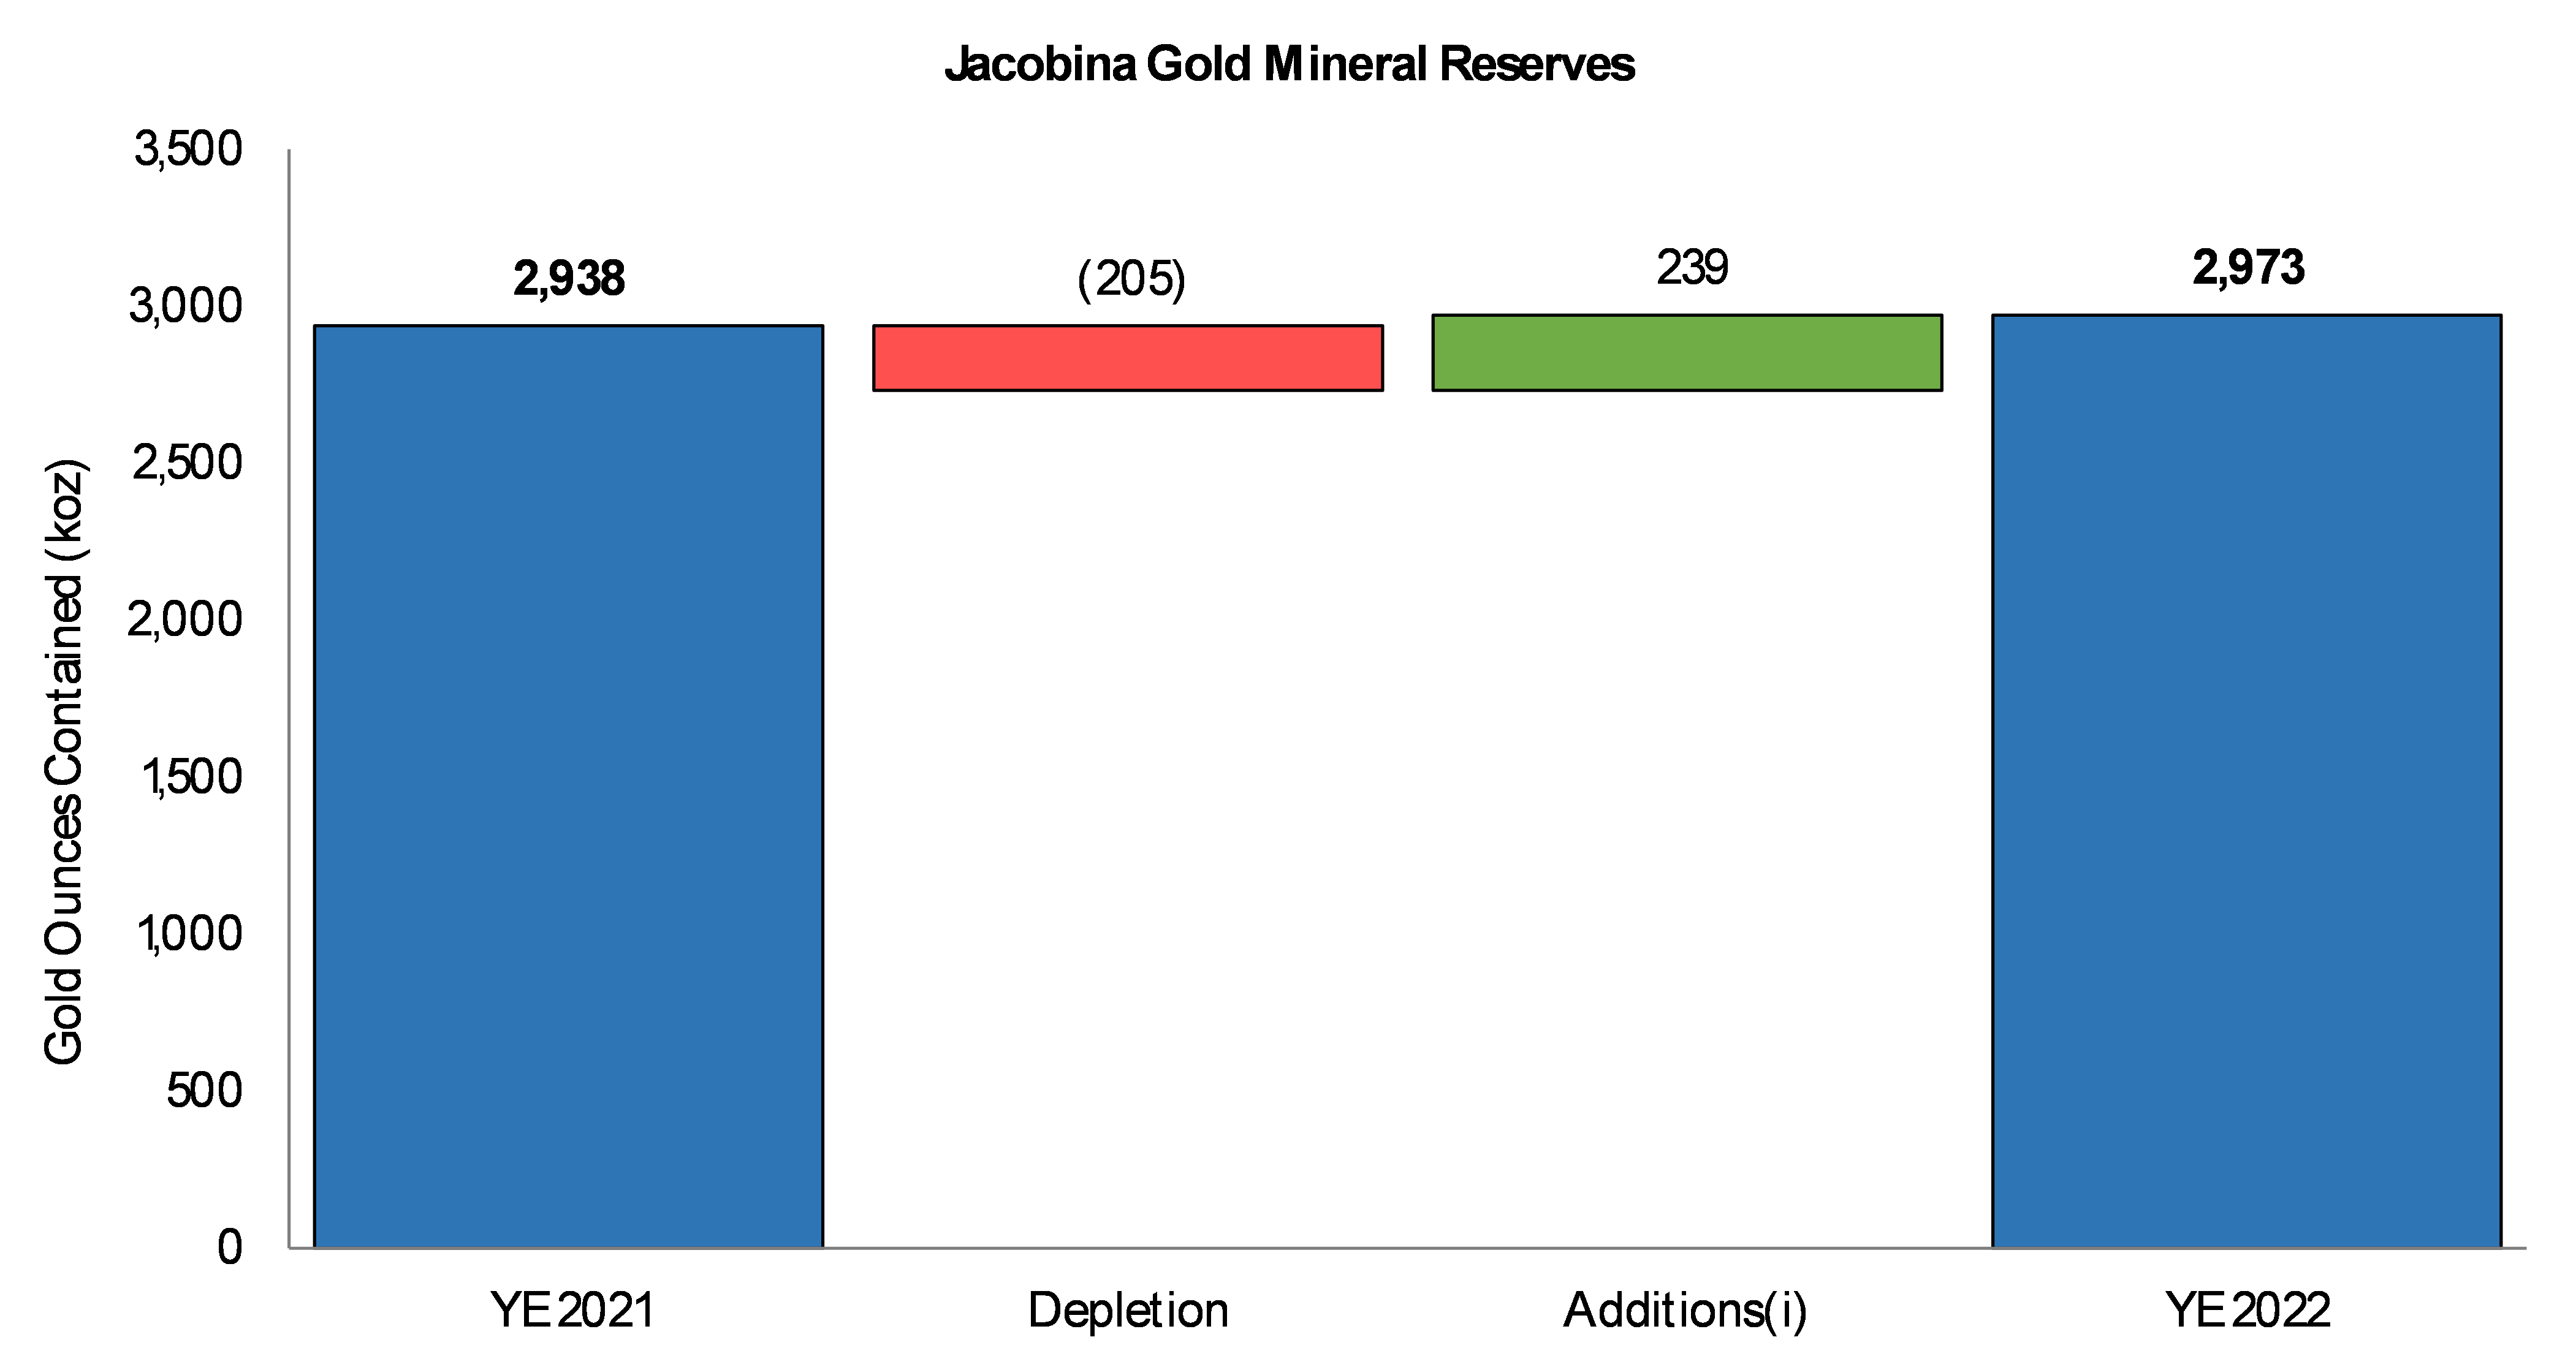 Change in Proven and Probable Mineral Reserves at Jacobina